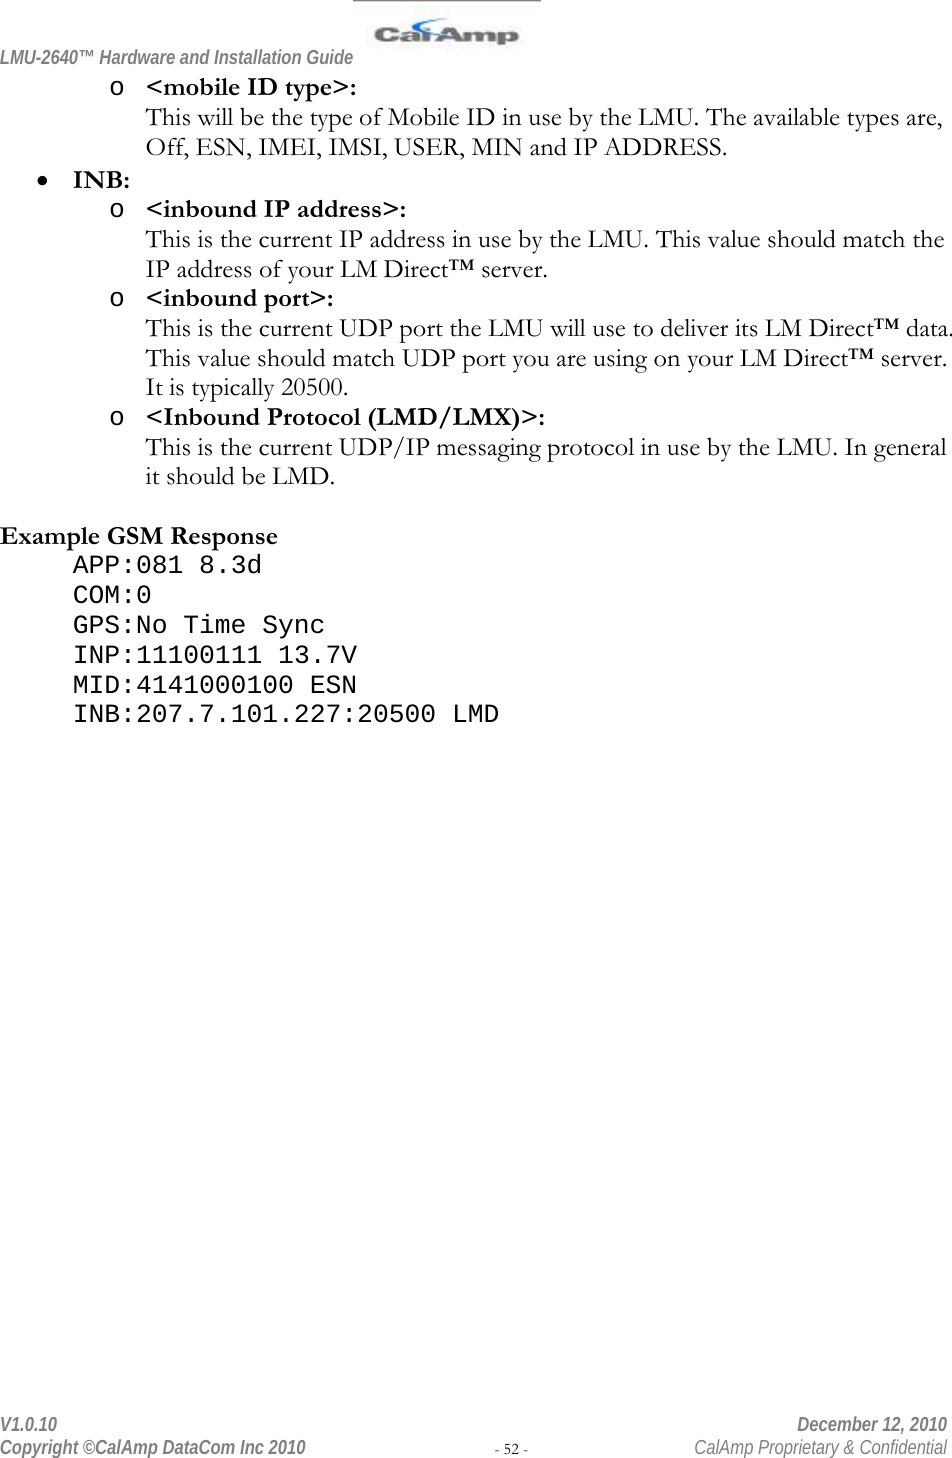 LMU-2640™ Hardware and Installation Guide  V1.0.10    December 12, 2010 Copyright ©CalAmp DataCom Inc 2010 - 52 -  CalAmp Proprietary &amp; Confidential o &lt;mobile ID type&gt;: This will be the type of Mobile ID in use by the LMU. The available types are, Off, ESN, IMEI, IMSI, USER, MIN and IP ADDRESS.  INB: o &lt;inbound IP address&gt;: This is the current IP address in use by the LMU. This value should match the IP address of your LM Direct™ server. o &lt;inbound port&gt;: This is the current UDP port the LMU will use to deliver its LM Direct™ data. This value should match UDP port you are using on your LM Direct™ server. It is typically 20500. o &lt;Inbound Protocol (LMD/LMX)&gt;: This is the current UDP/IP messaging protocol in use by the LMU. In general it should be LMD.   Example GSM Response APP:081 8.3d COM:0 GPS:No Time Sync INP:11100111 13.7V MID:4141000100 ESN INB:207.7.101.227:20500 LMD 